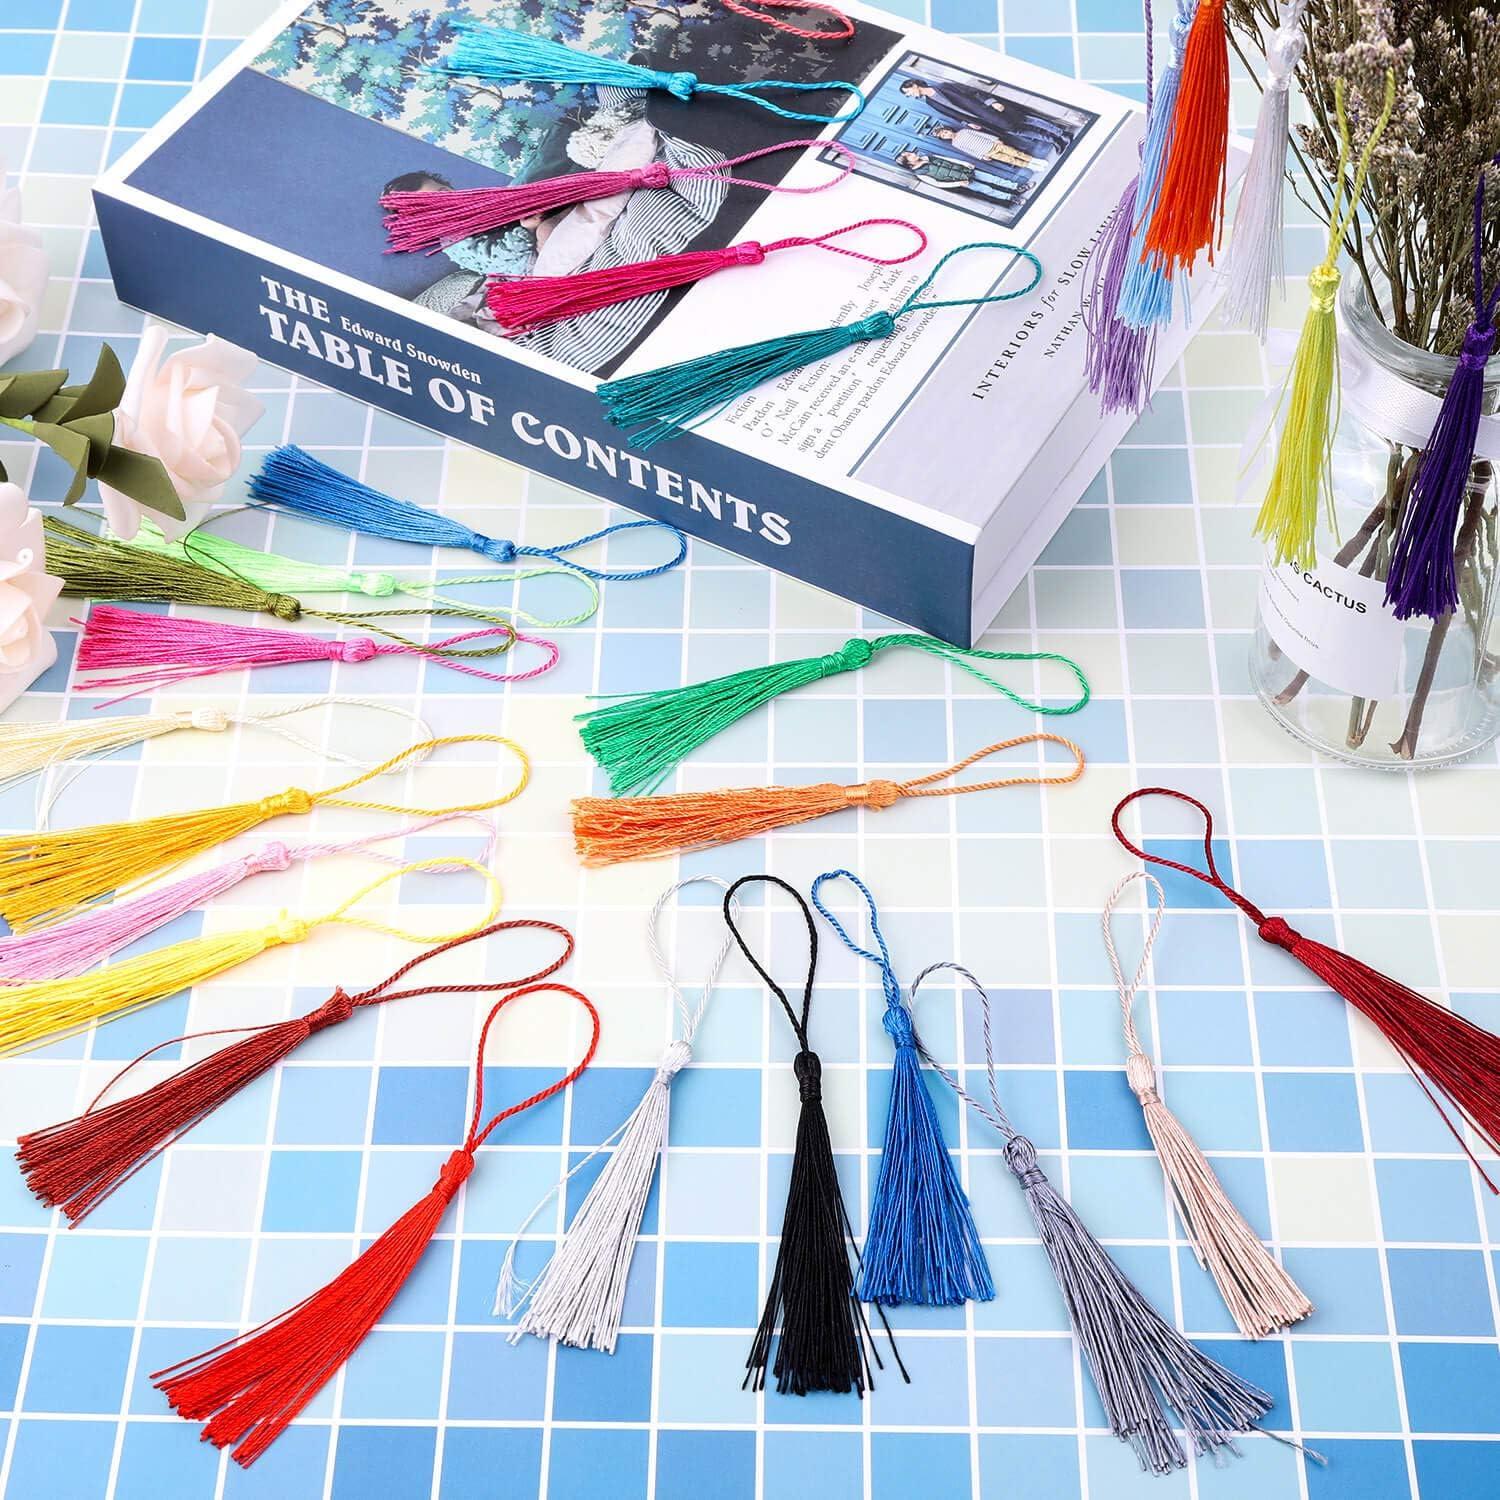 Tassels, Cridoz 120Pcs Bookmark Tassels Silky Handmade Soft Craft Mini  Tassels with Loops for Bookmarks, Crafts and Jewelry Making, 30 Colors